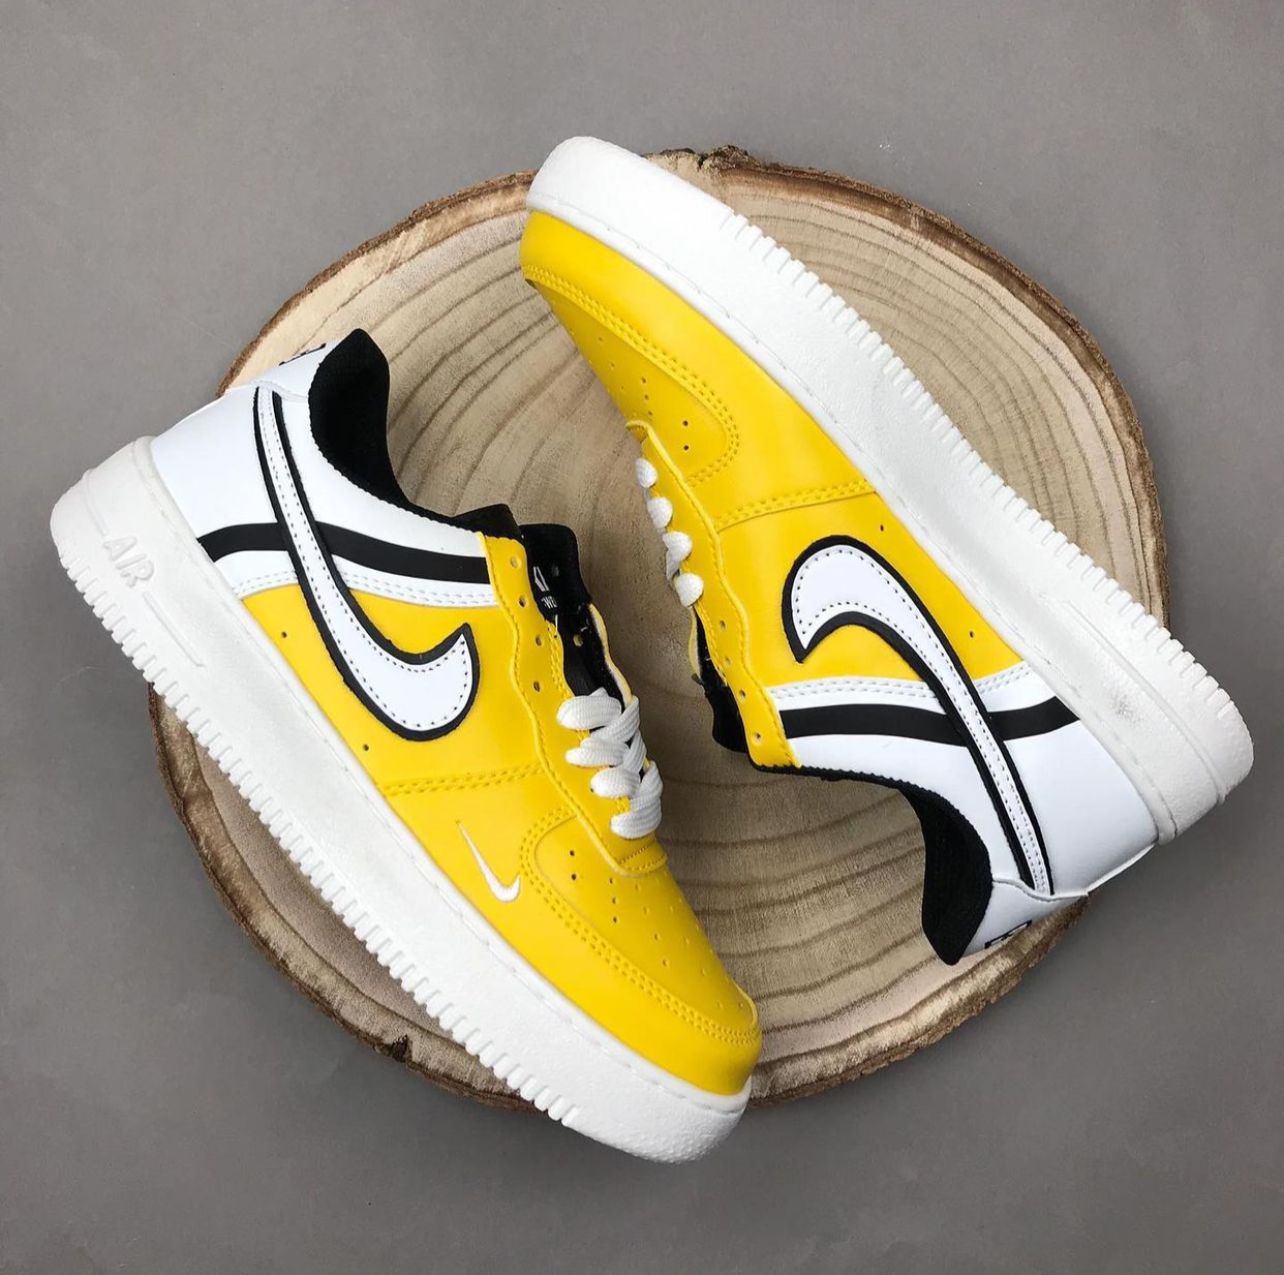 Air force 1 “Yellow”